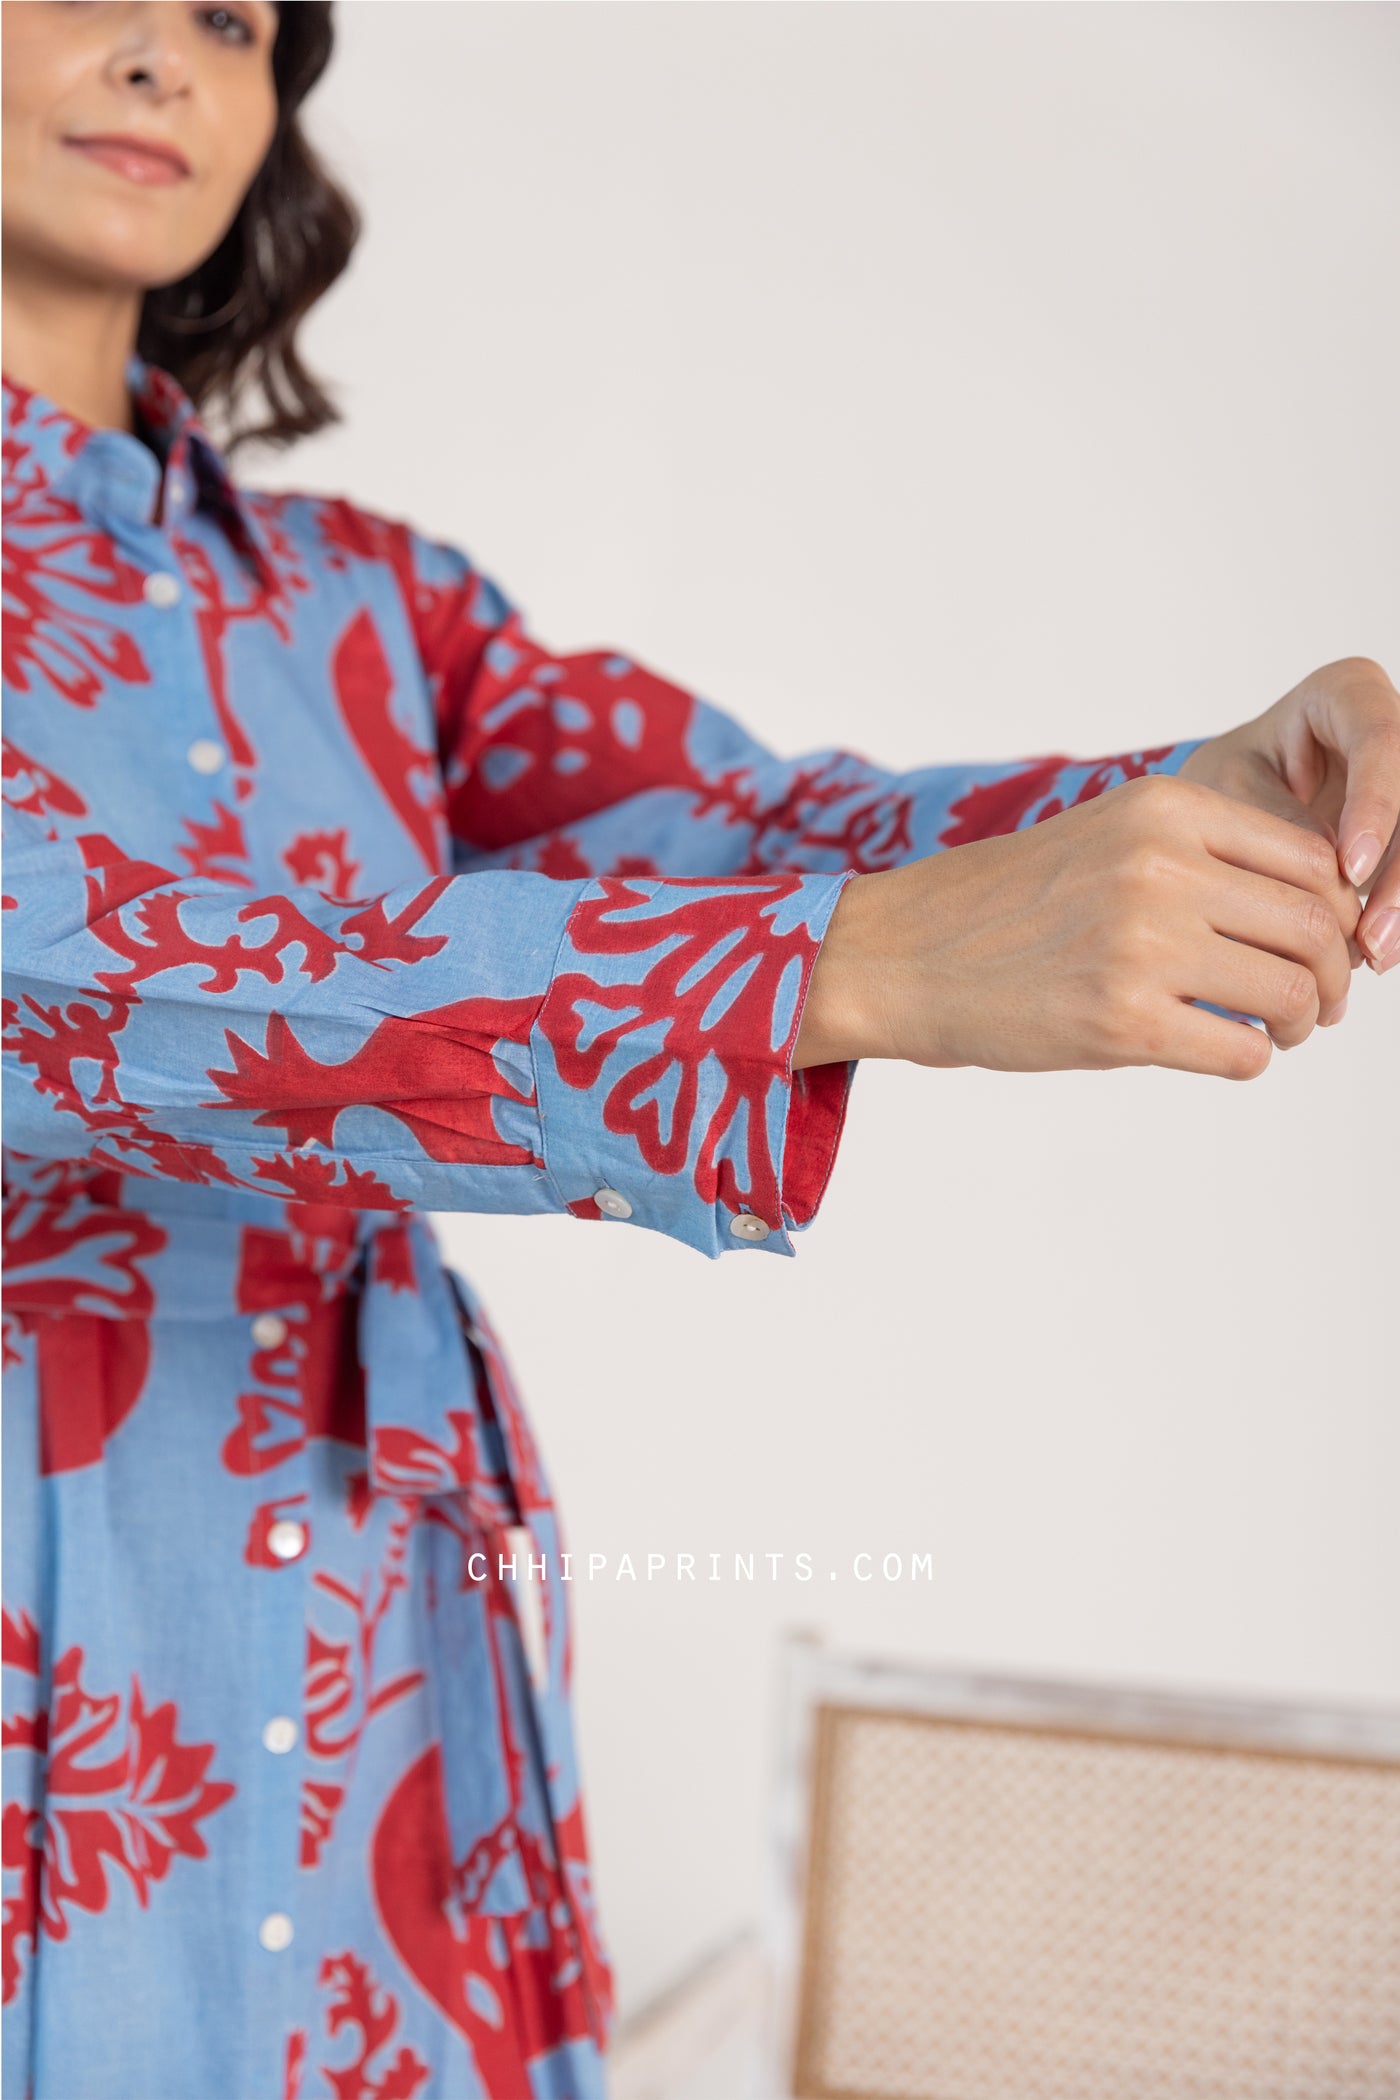 Cotton Anar Jaal Print Long Shirt Dress with Belt in Shades of Blue and Red